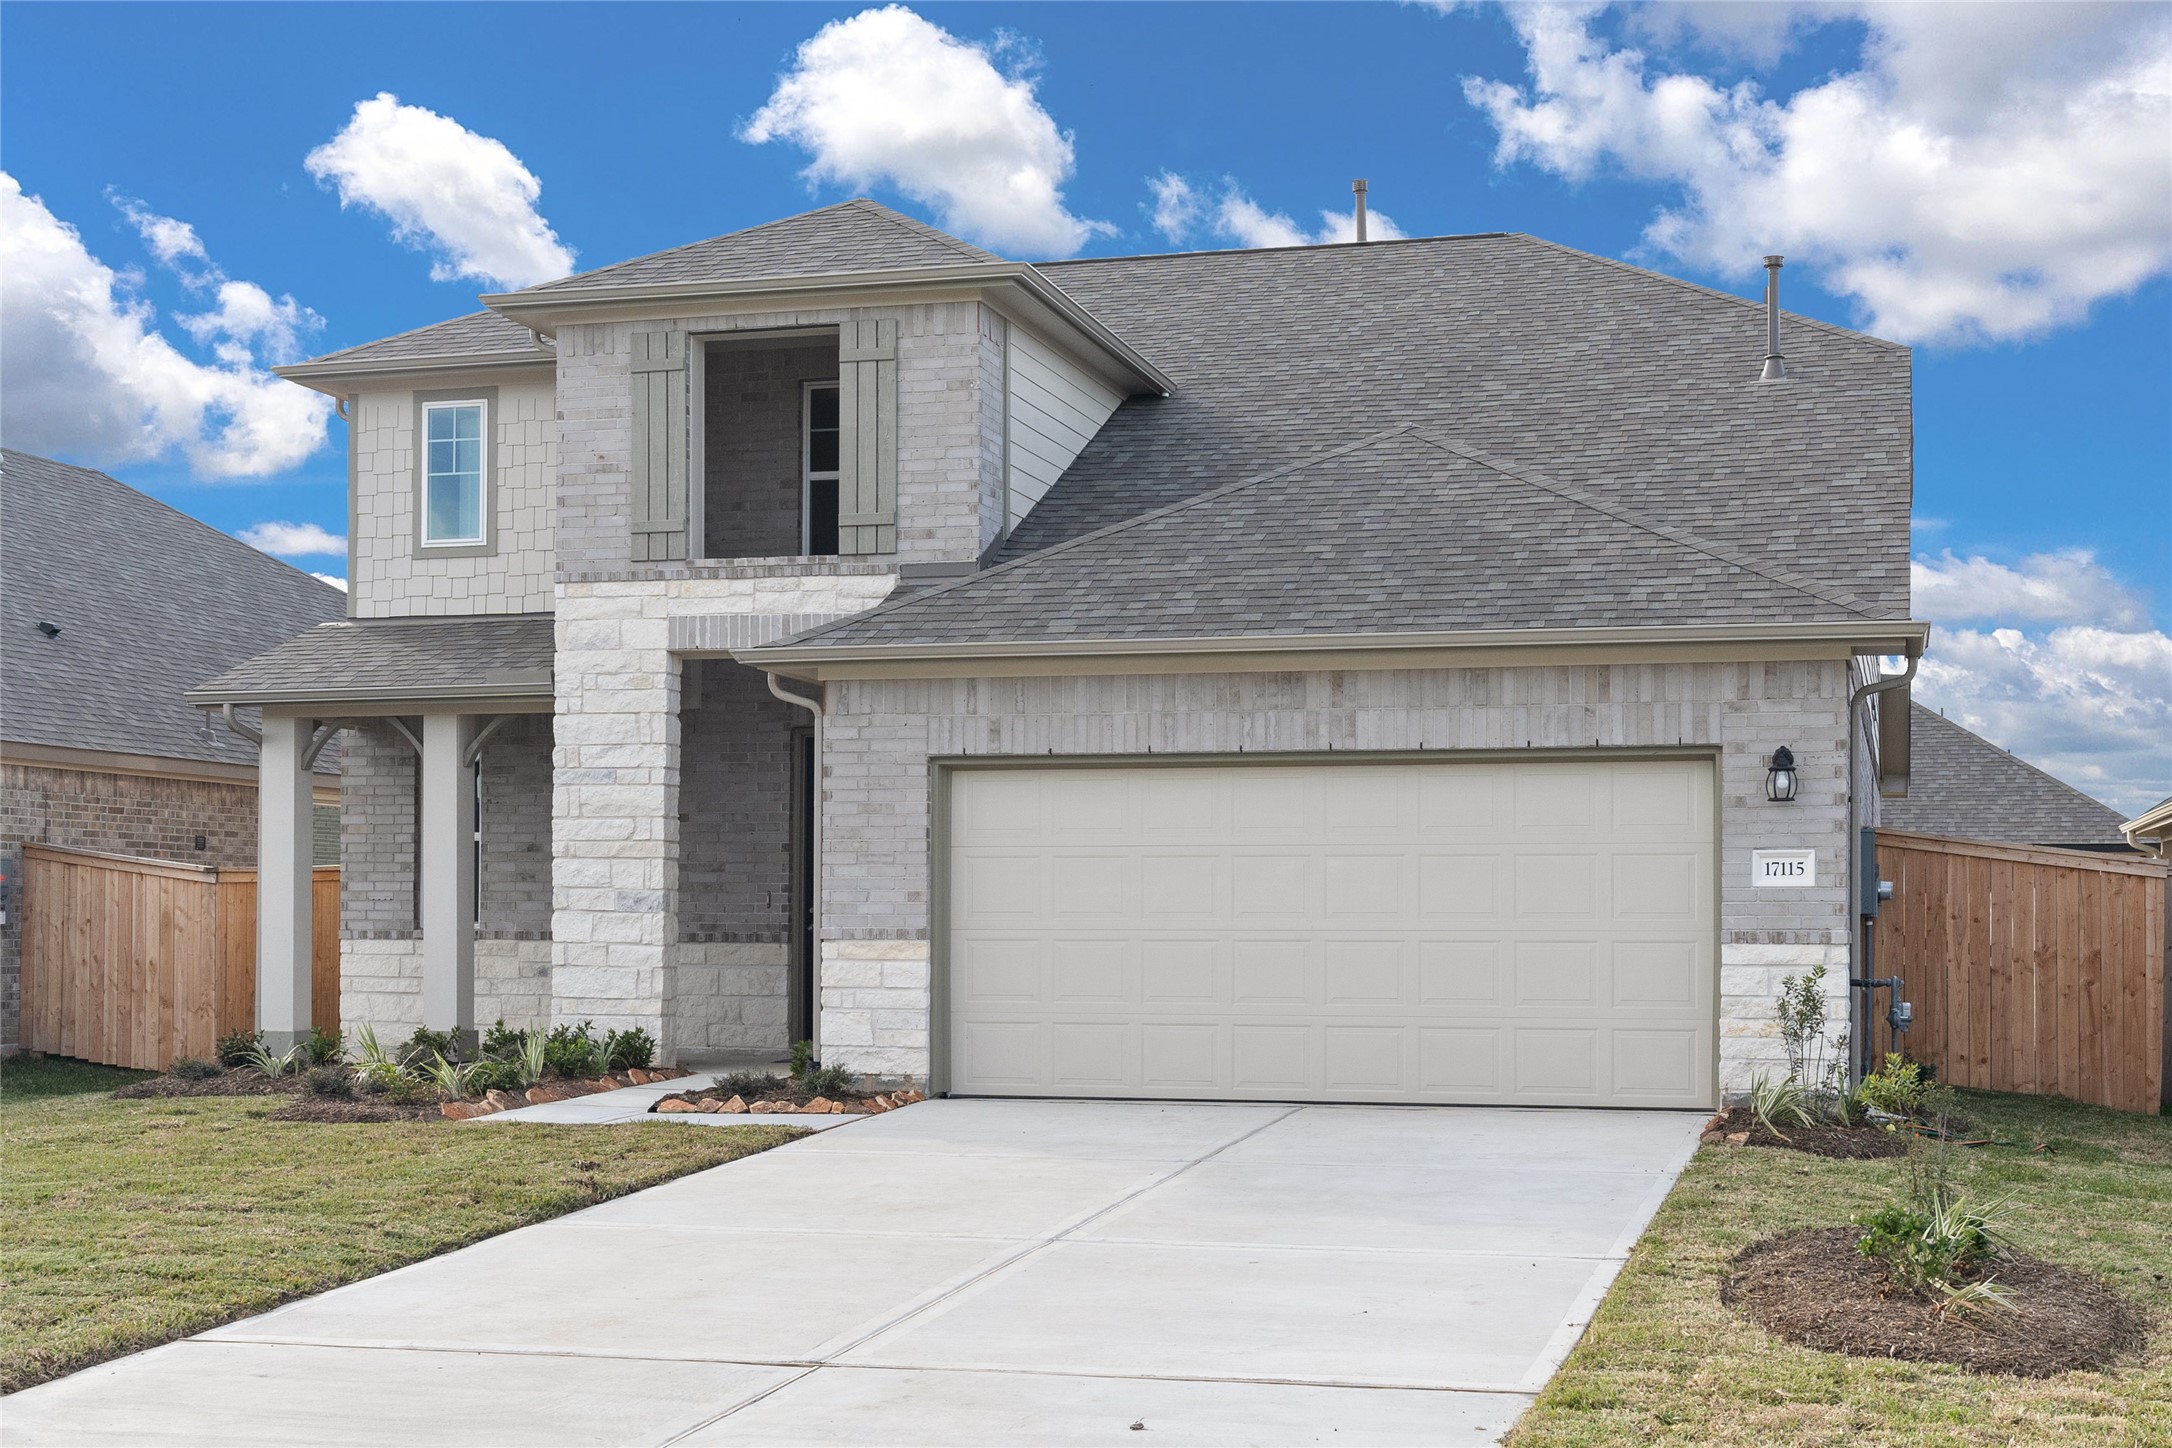 Welcome home to 17115 Daylily Dune Way located in the community of Dellrose and zoned to Waller ISD.